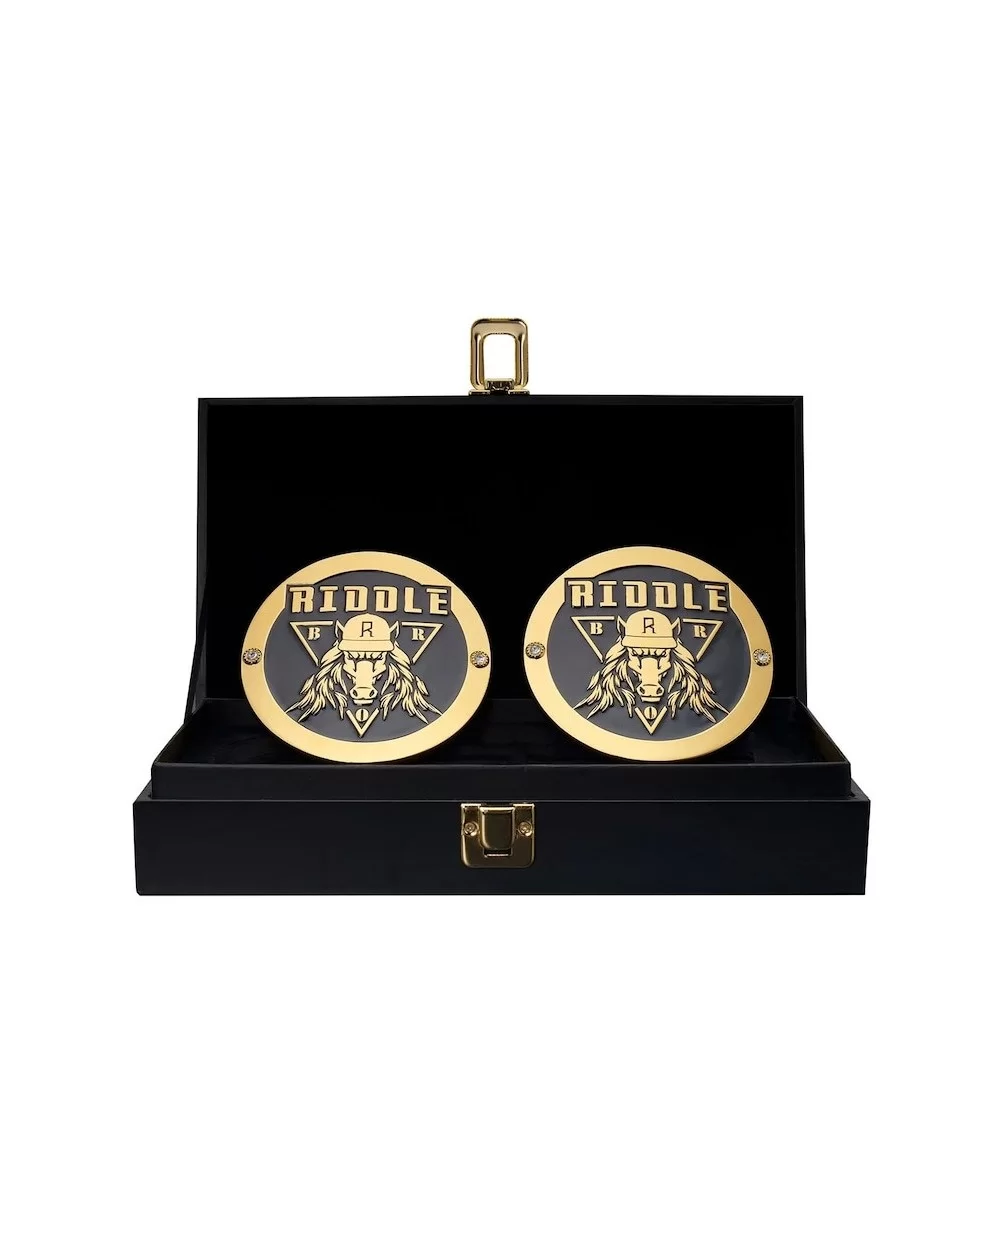 Riddle Championship Replica Side Plate Box Set $36.00 Collectibles